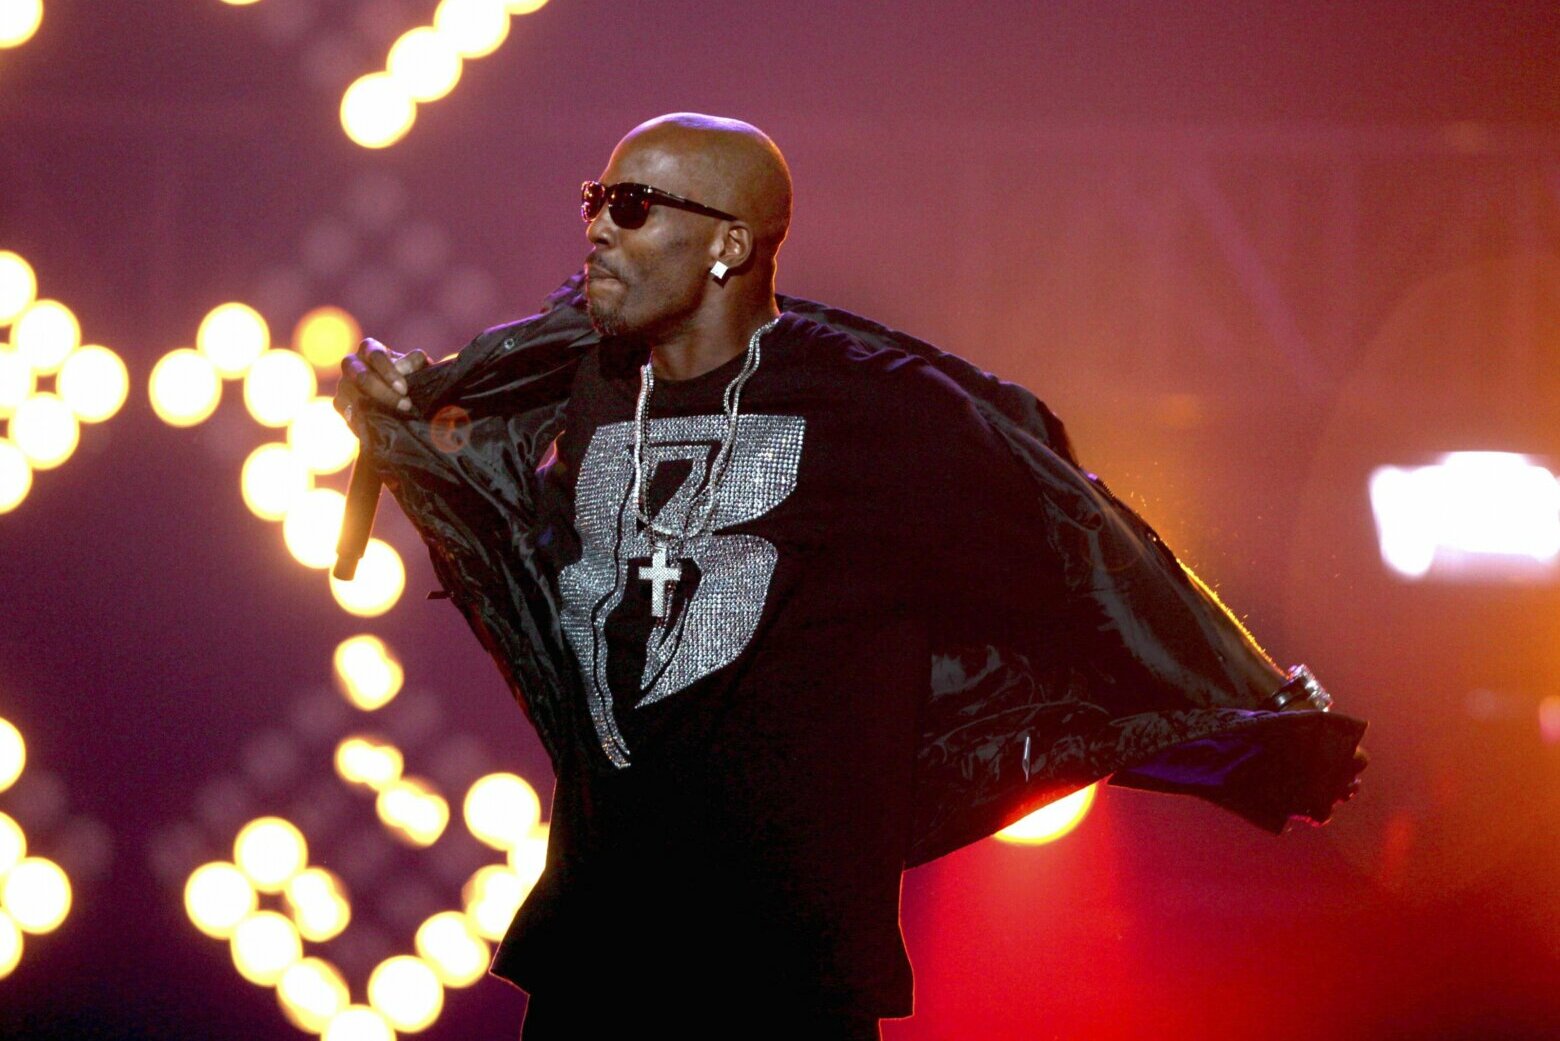 ‘Nothing less than a giant’: rapper actor DMX dies at 50